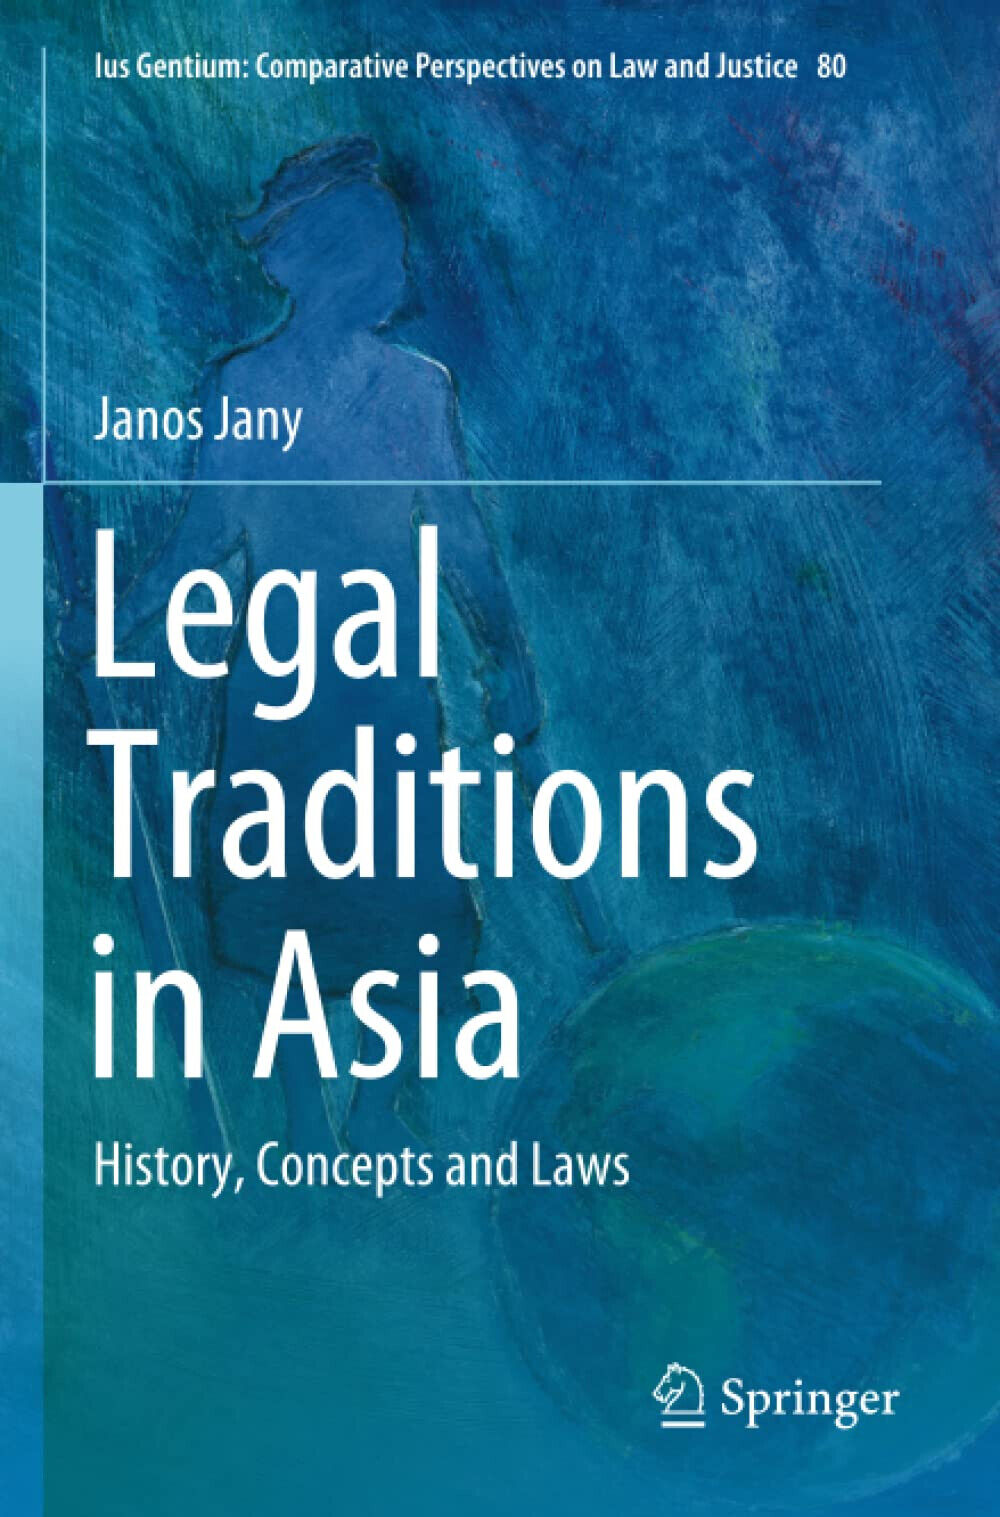 Legal Traditions in Asia - Janos Jany - Springer, 2021